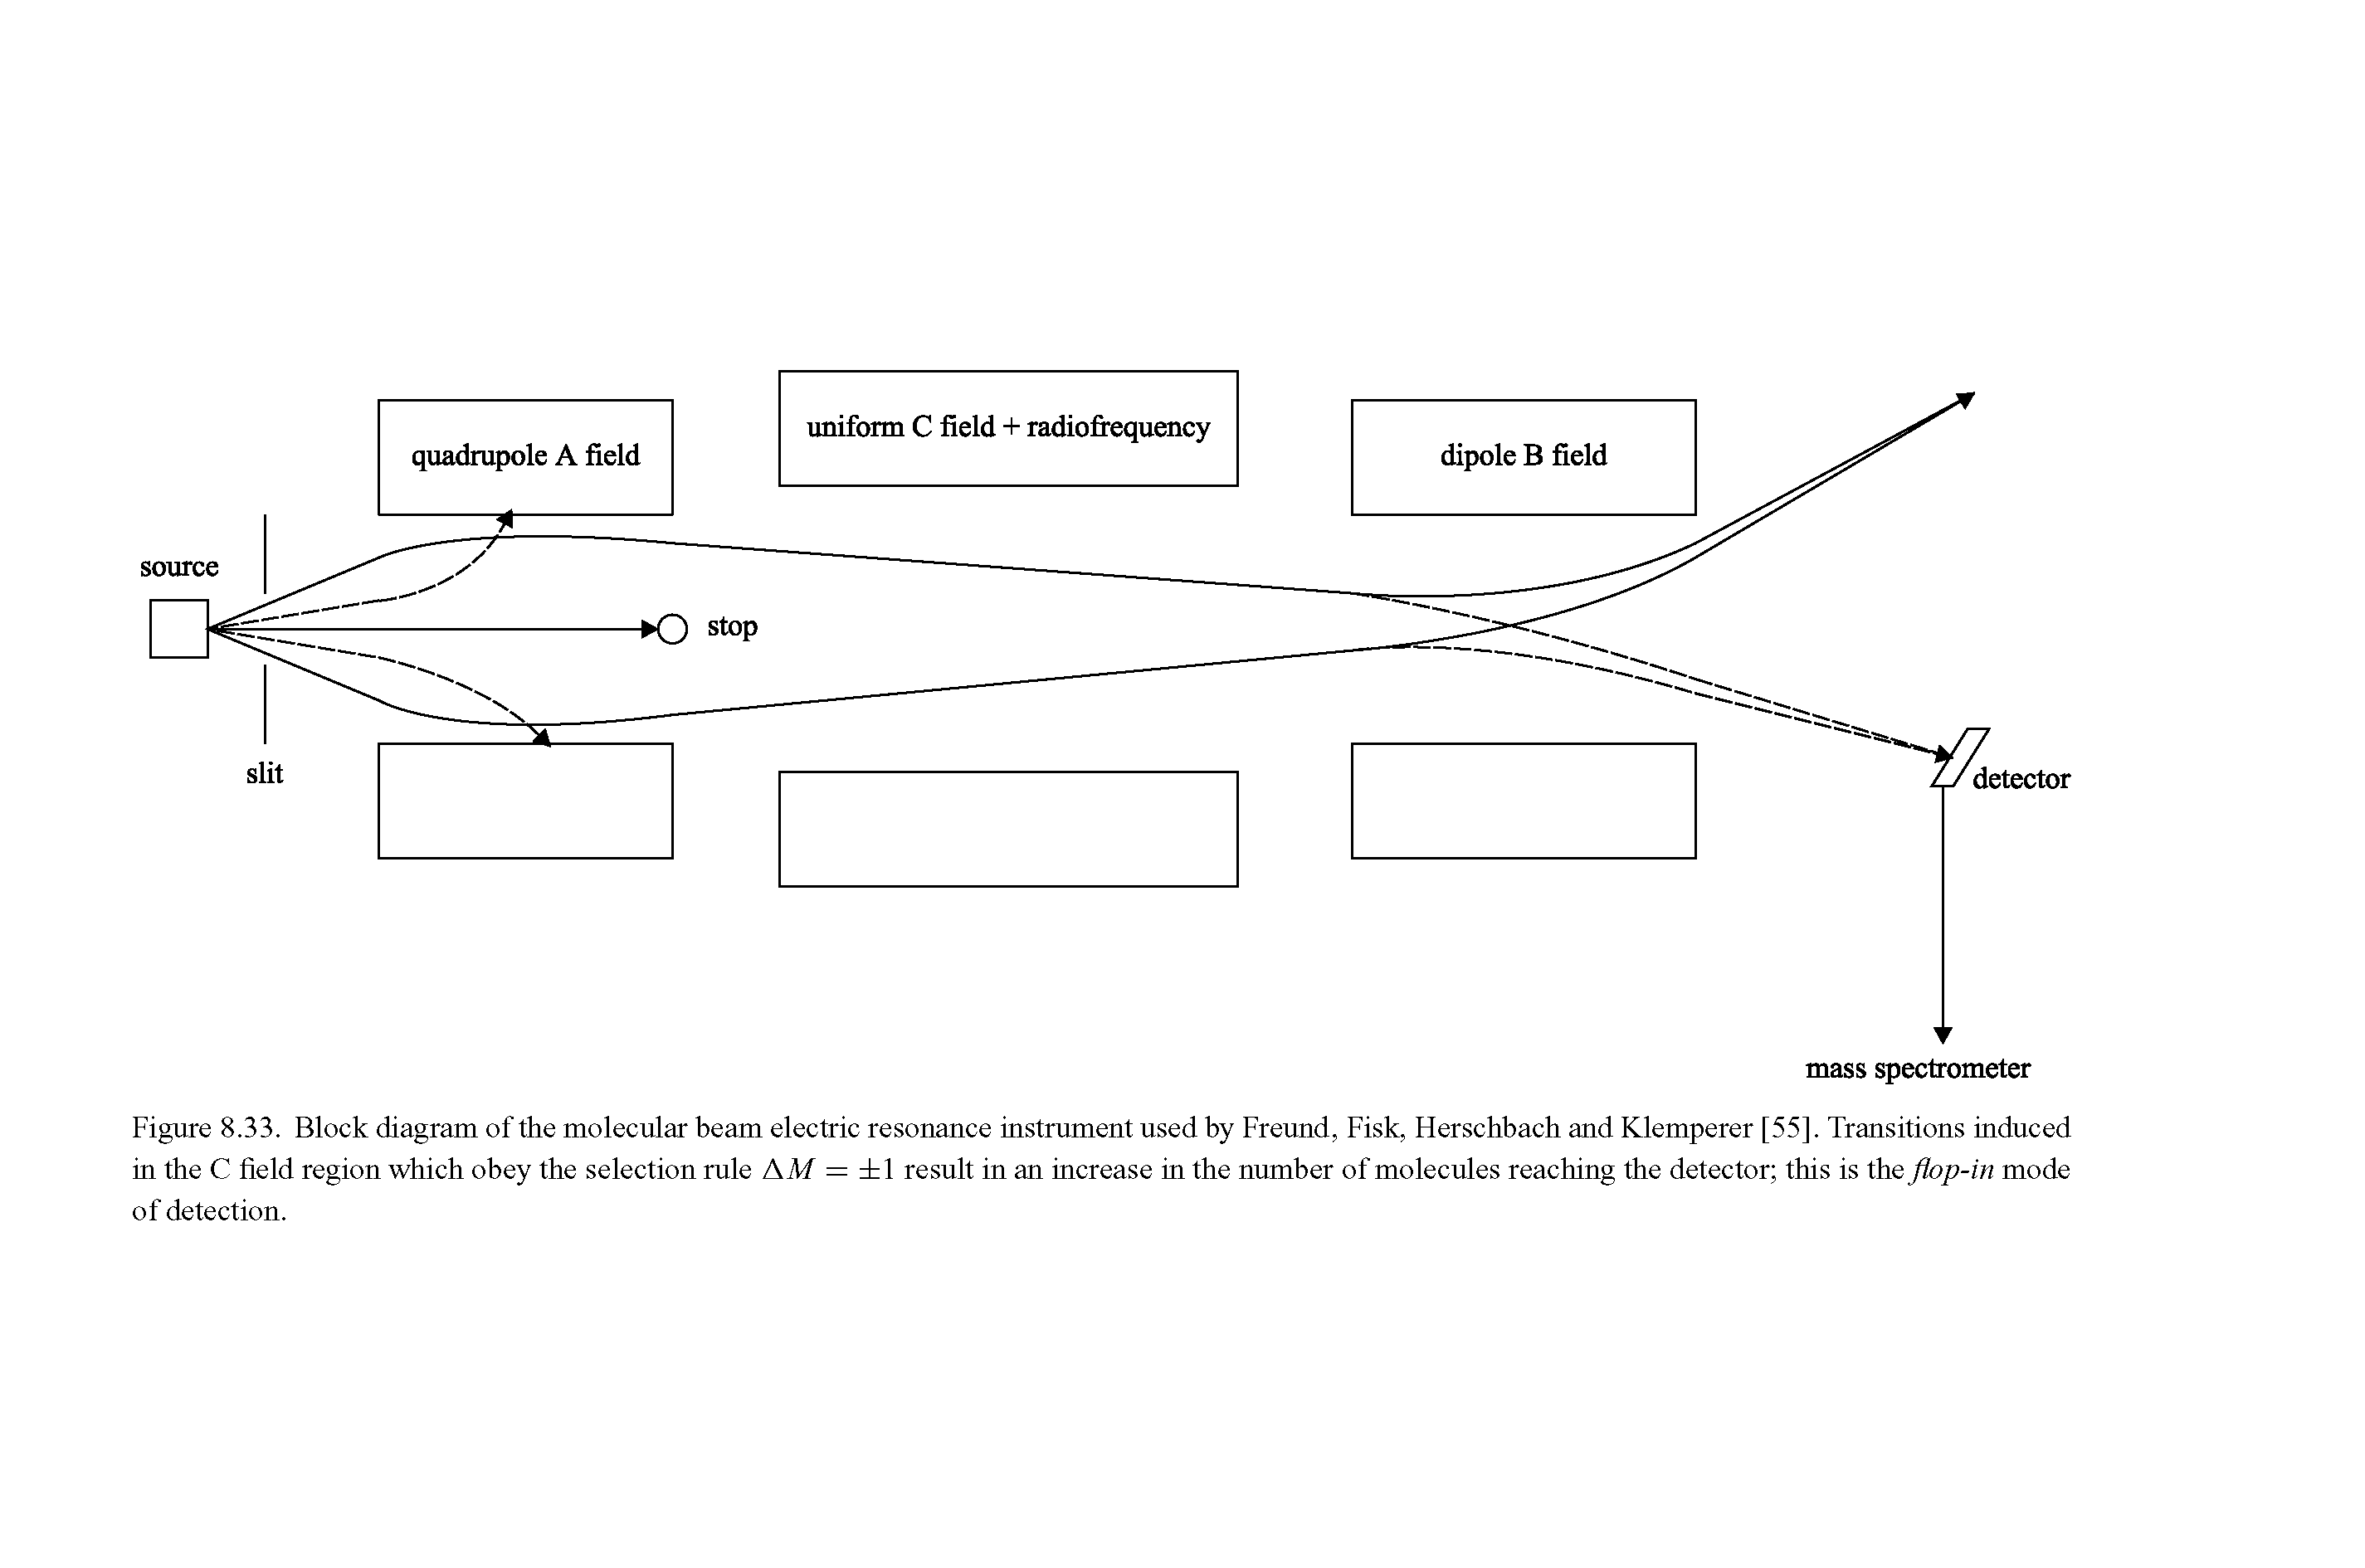 Figure 8.33. Block diagram of the molecular beam electric resonance instrument used by Freund, Fisk, Flerschbach and Klemperer [55]. Transitions induced in the C field region which obey the selection rule AM = 1 result in an increase in the number of molecules reaching the detector this is the flop-in mode of detection.